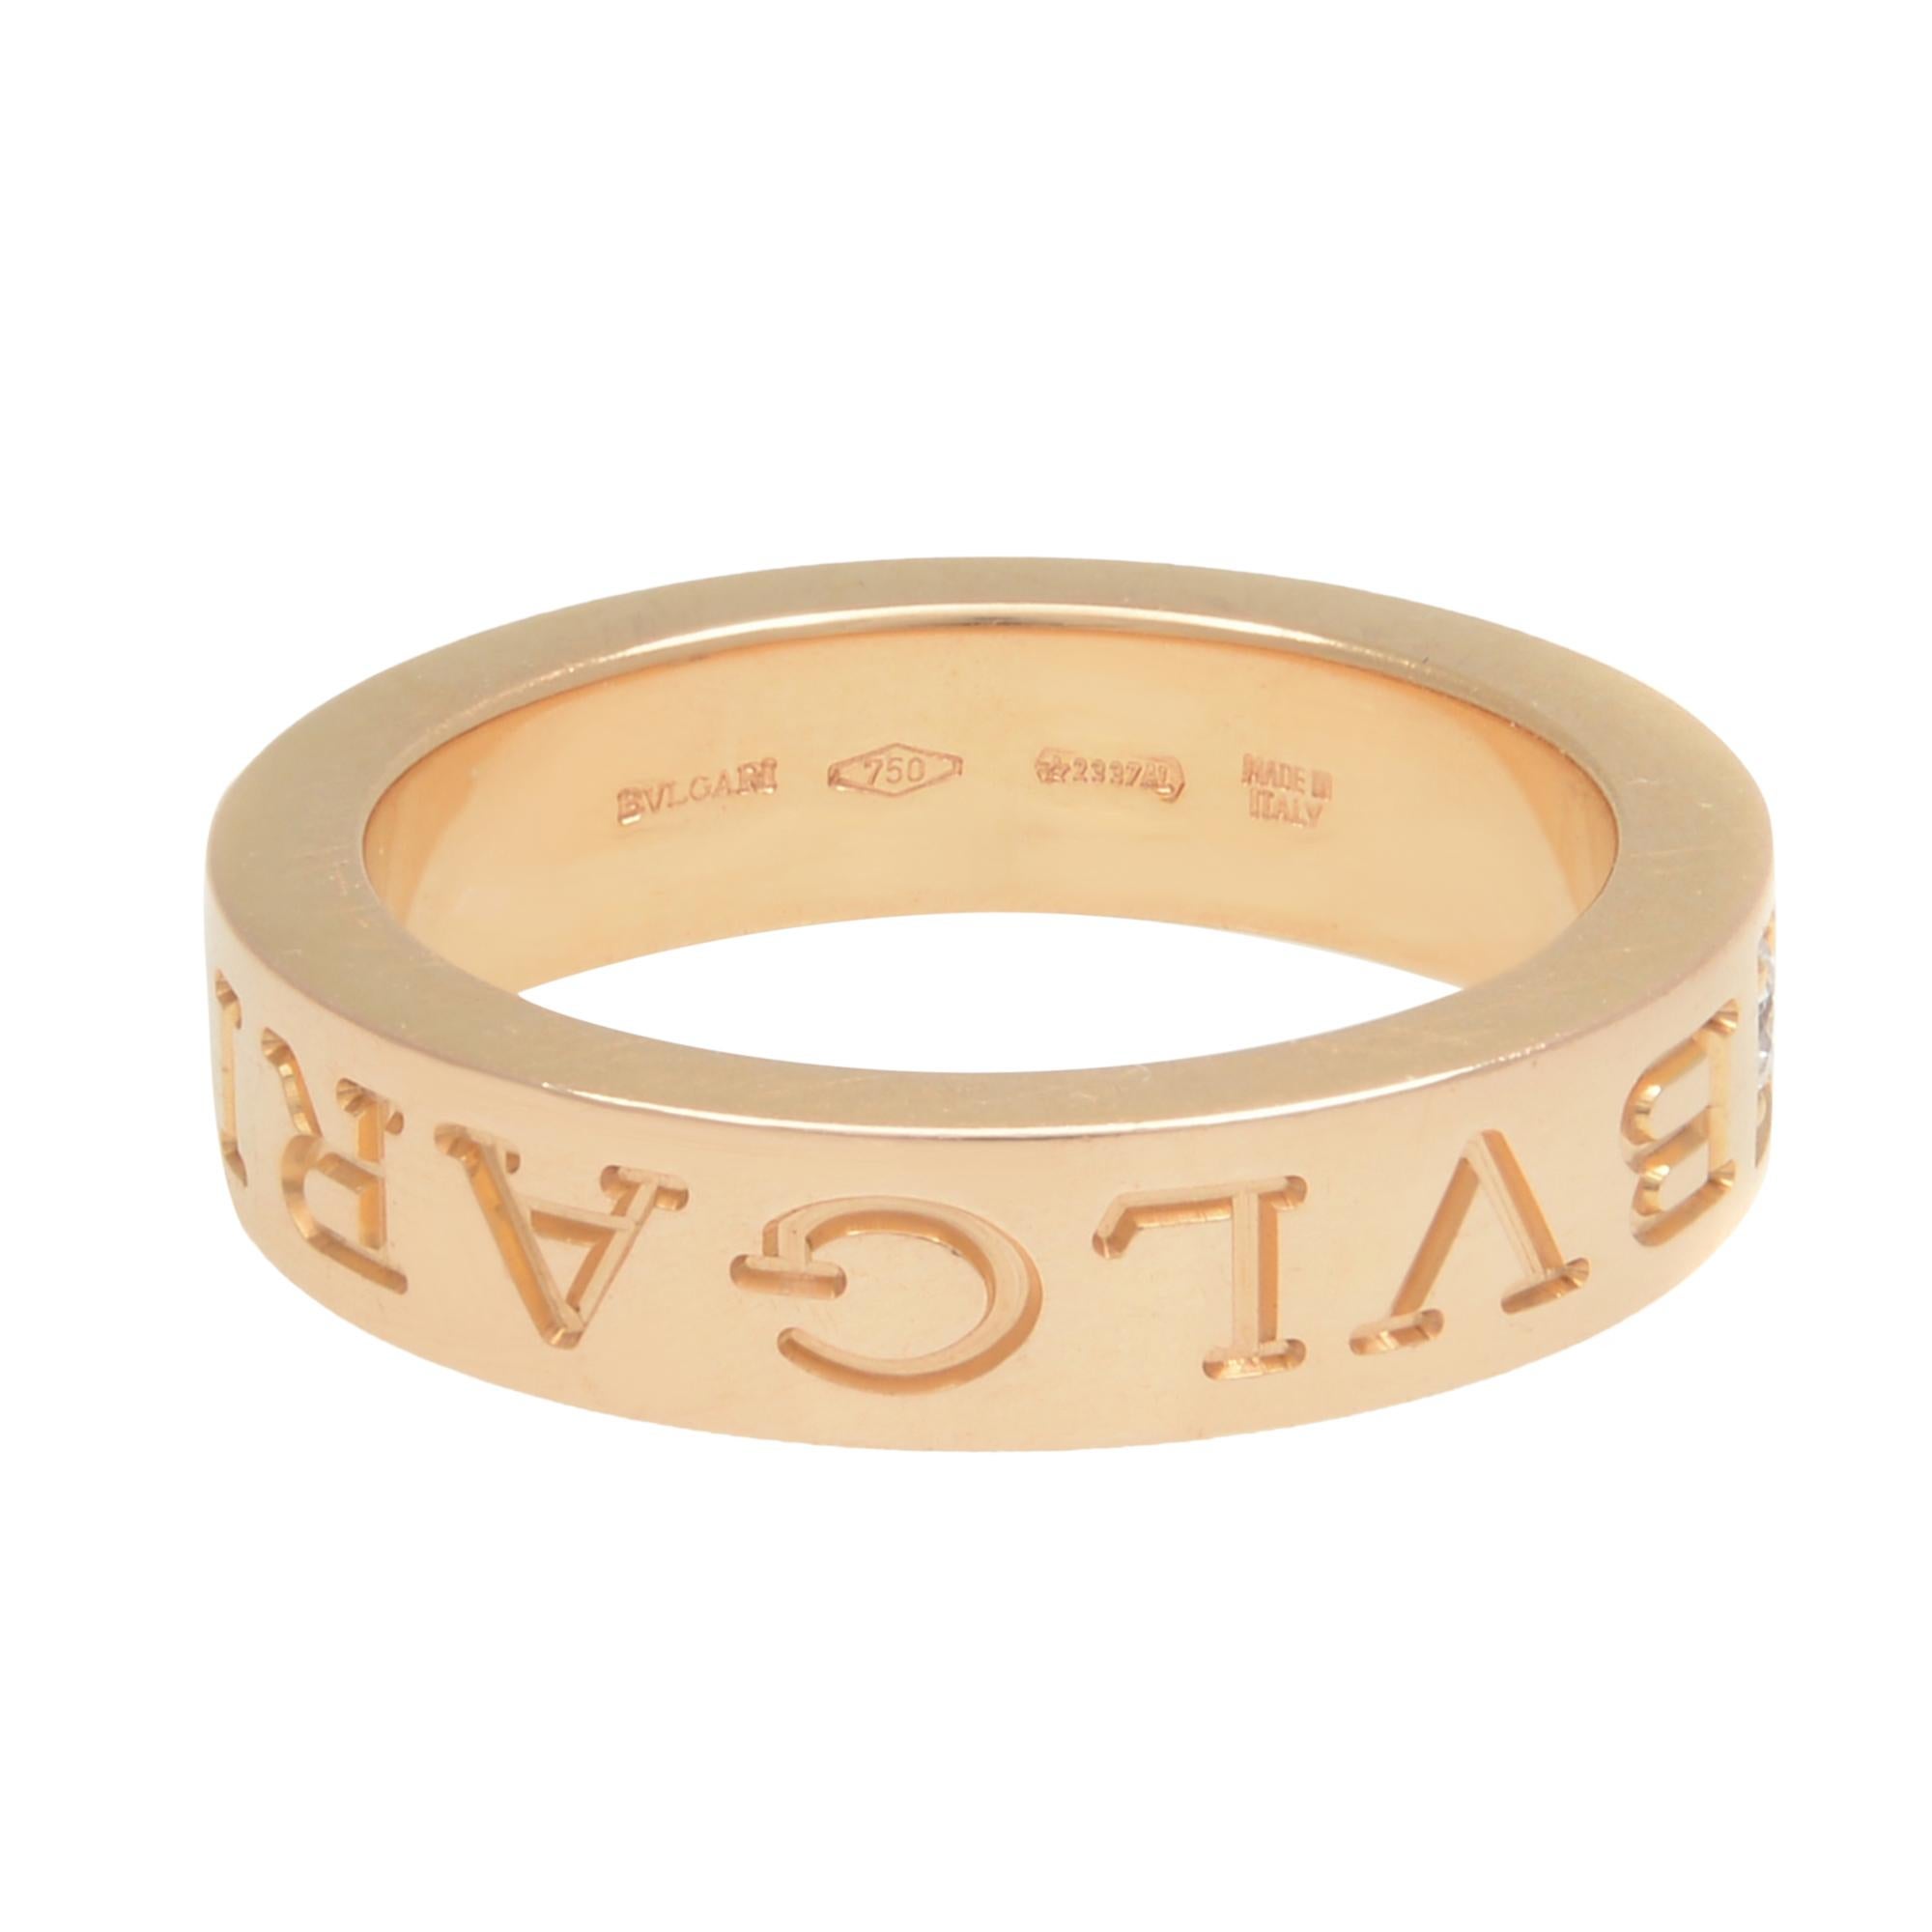 Bvlgari Bvlgari 18k rose gold ring with one diamond. Width: 4.00mm. Ring size 4.75. Looks great as a pinky ring. Diamond weight: 0.04cttw. Excellent pre-owned condition. Comes with box and papers.